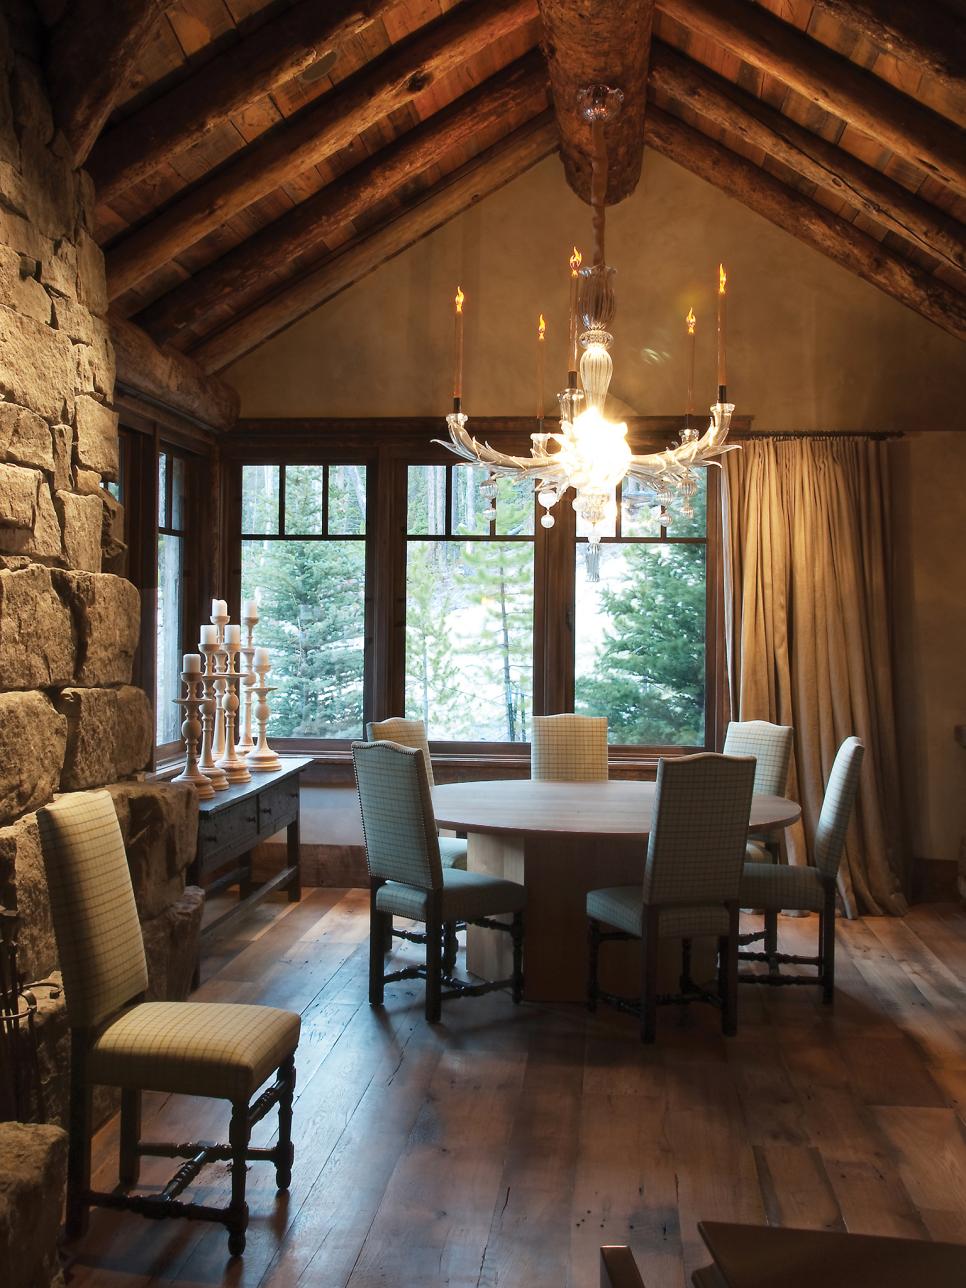 Rustic Meets Formal Dining Space